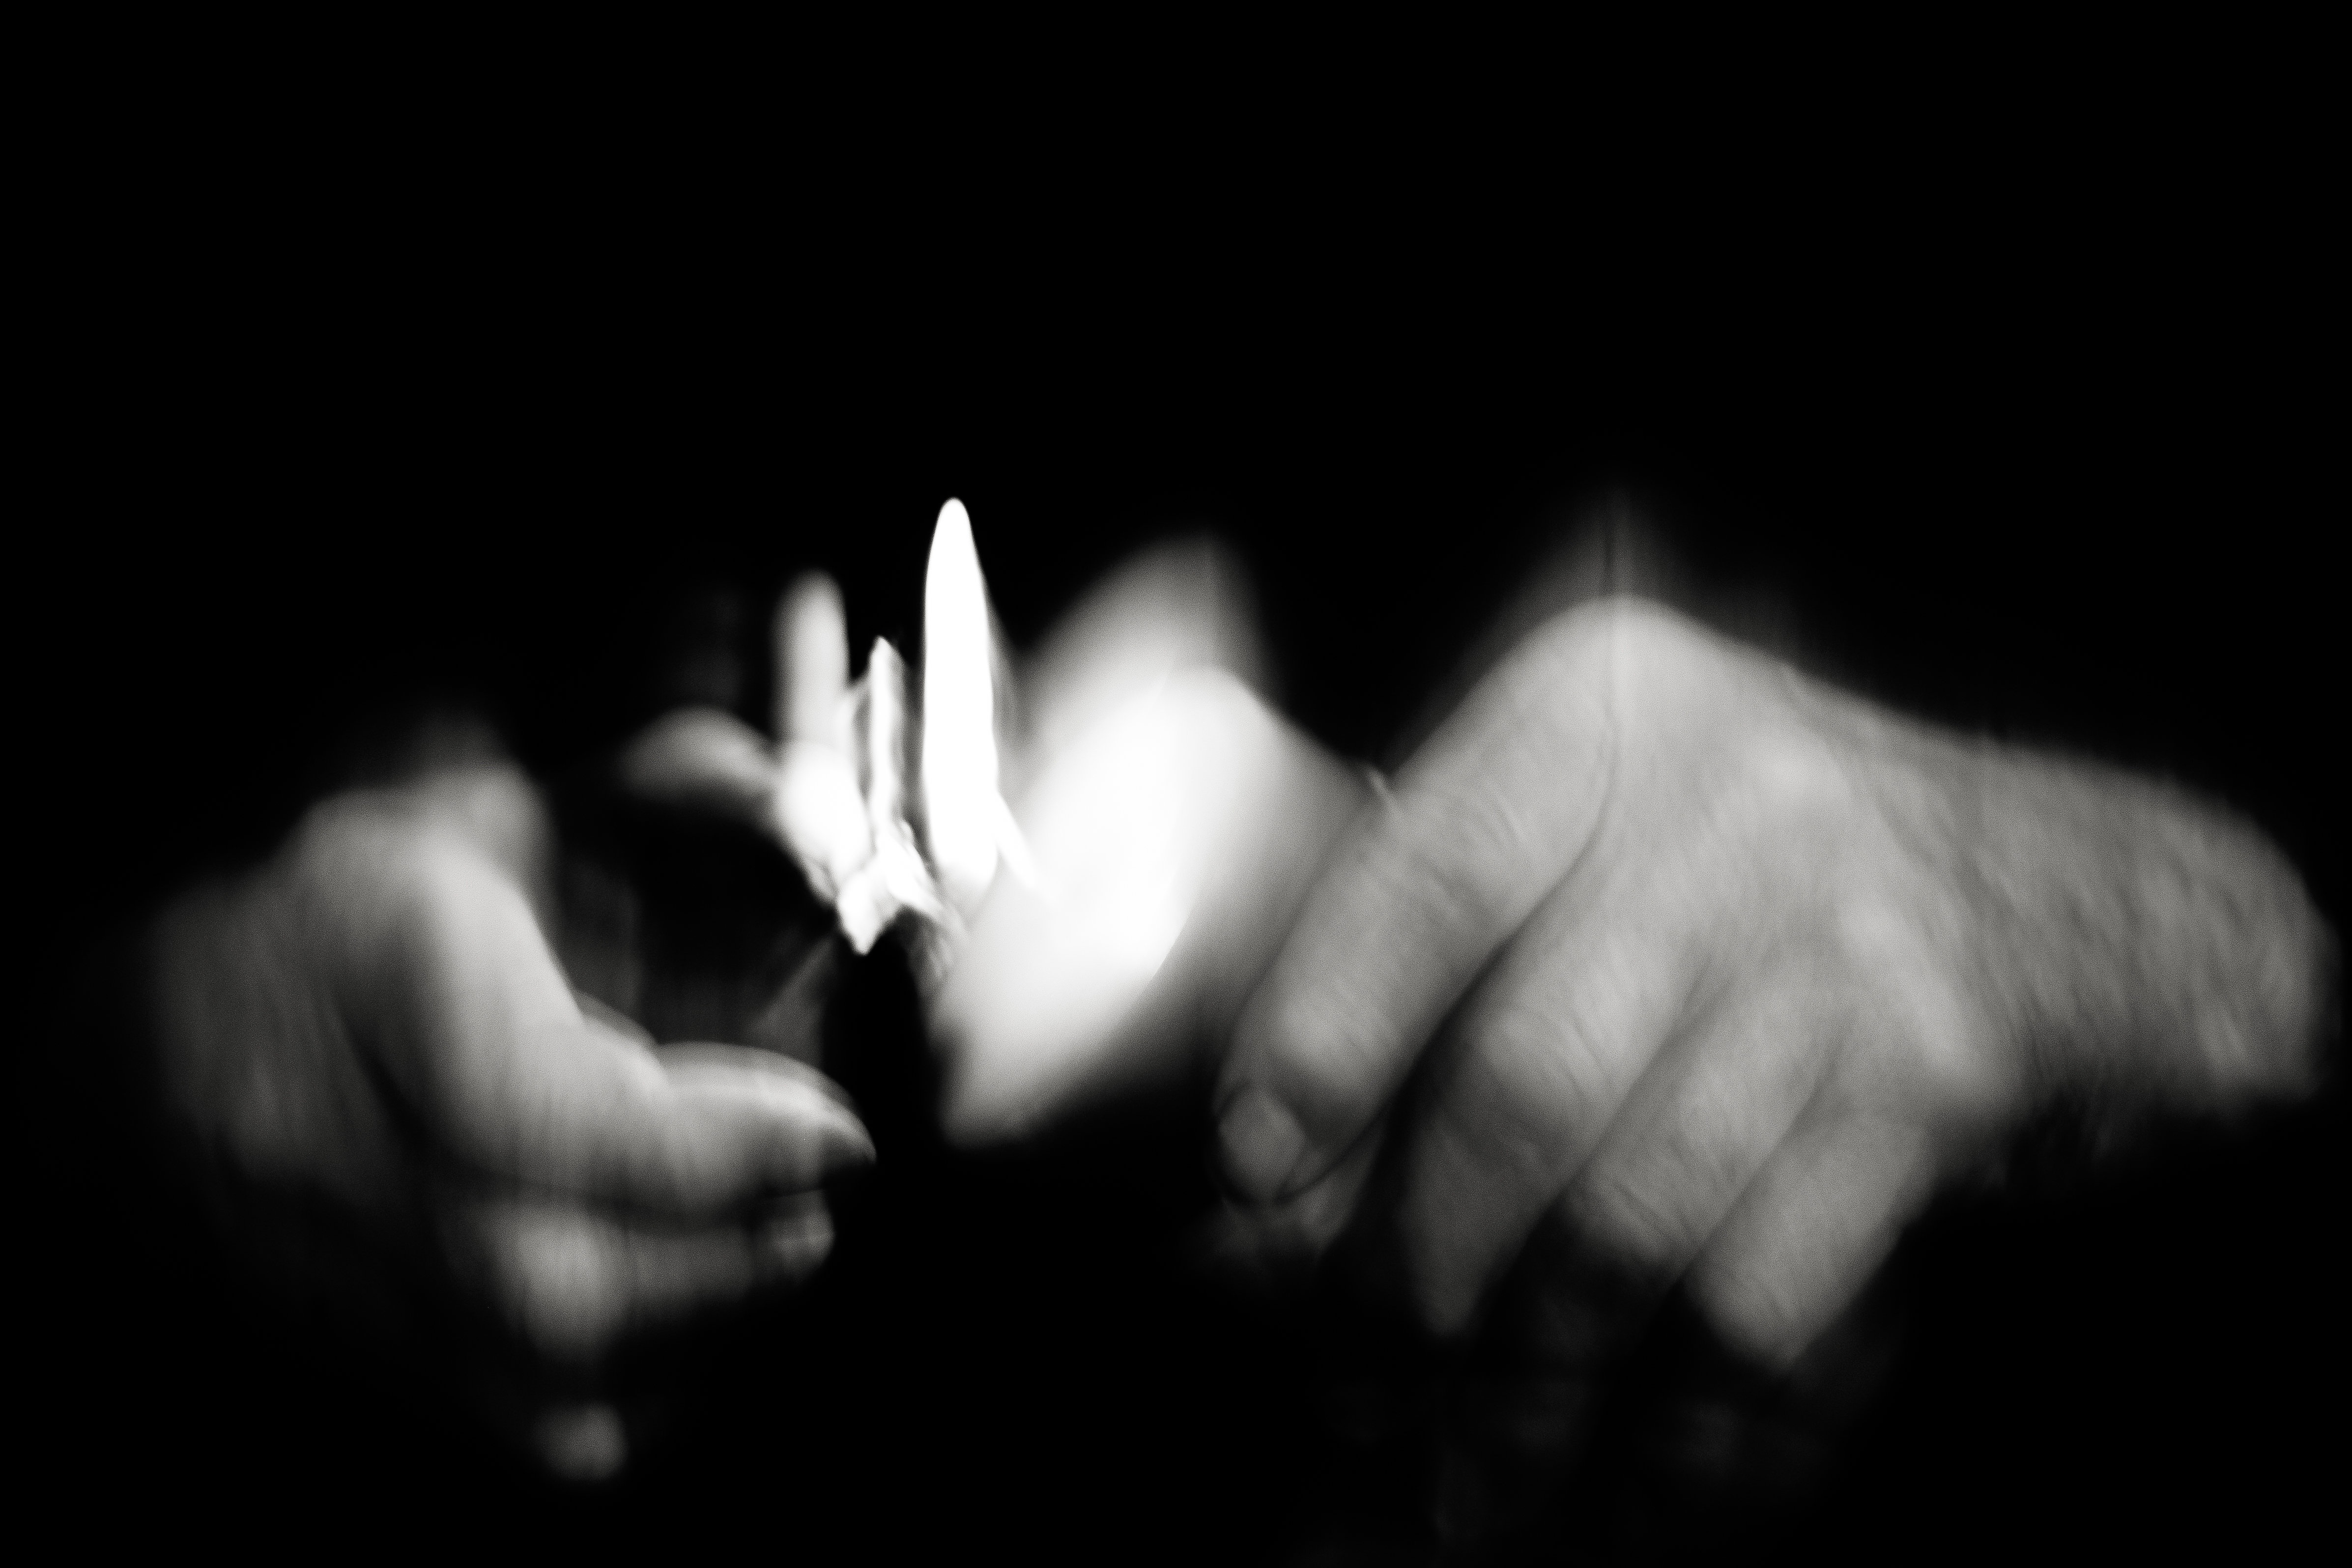 A blurry artistic photo, in black and white, of two hands holding a lighter and setting fire to some paper.